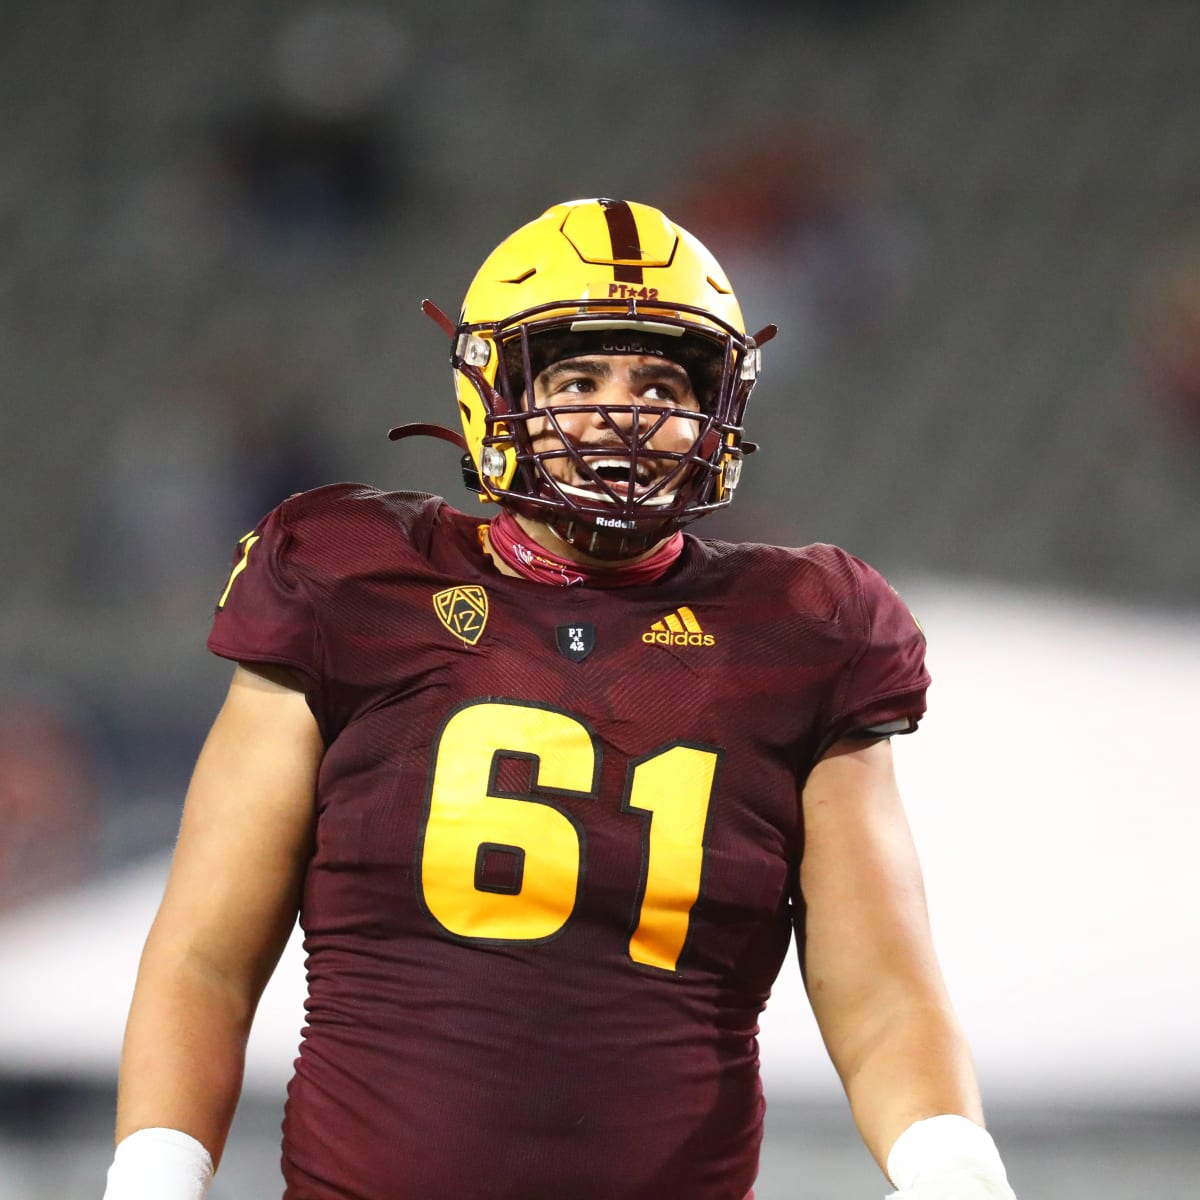 ASU football could see big group selected in NFL Draft